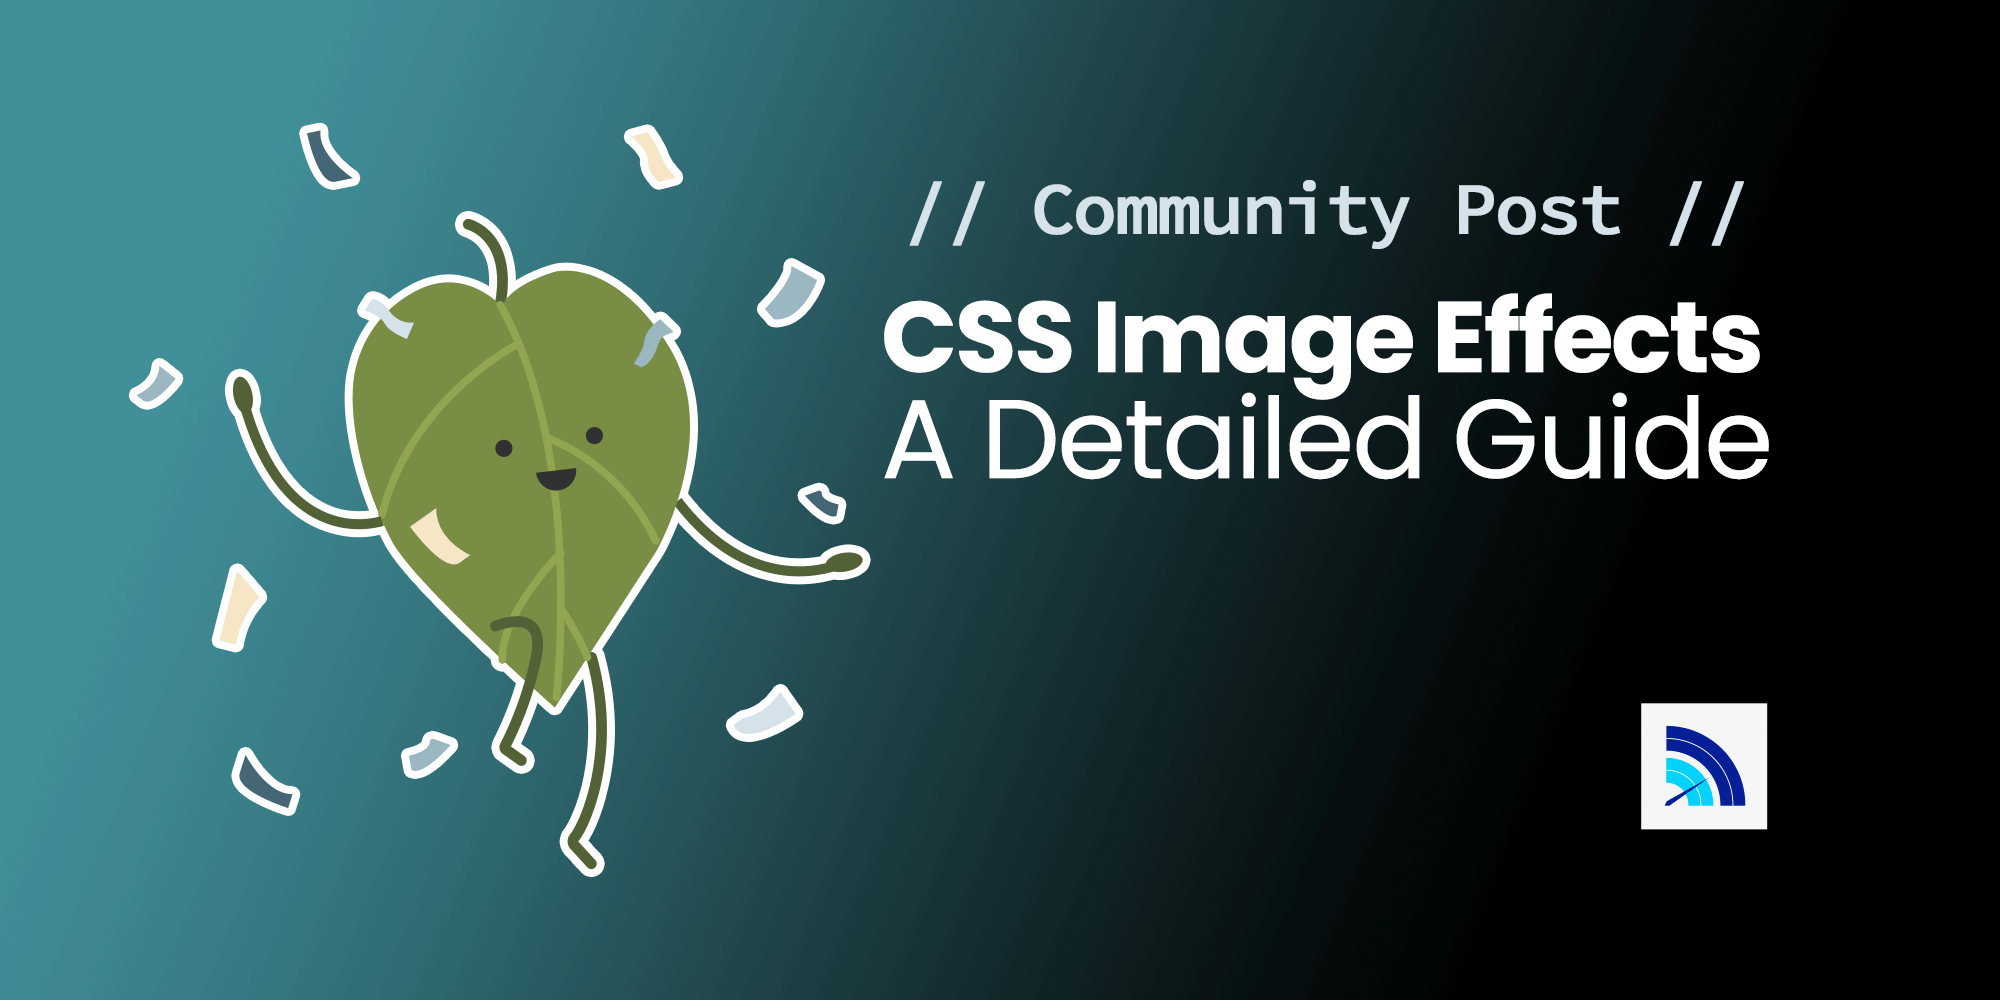 CSS Image Effects: A Detailed Guide